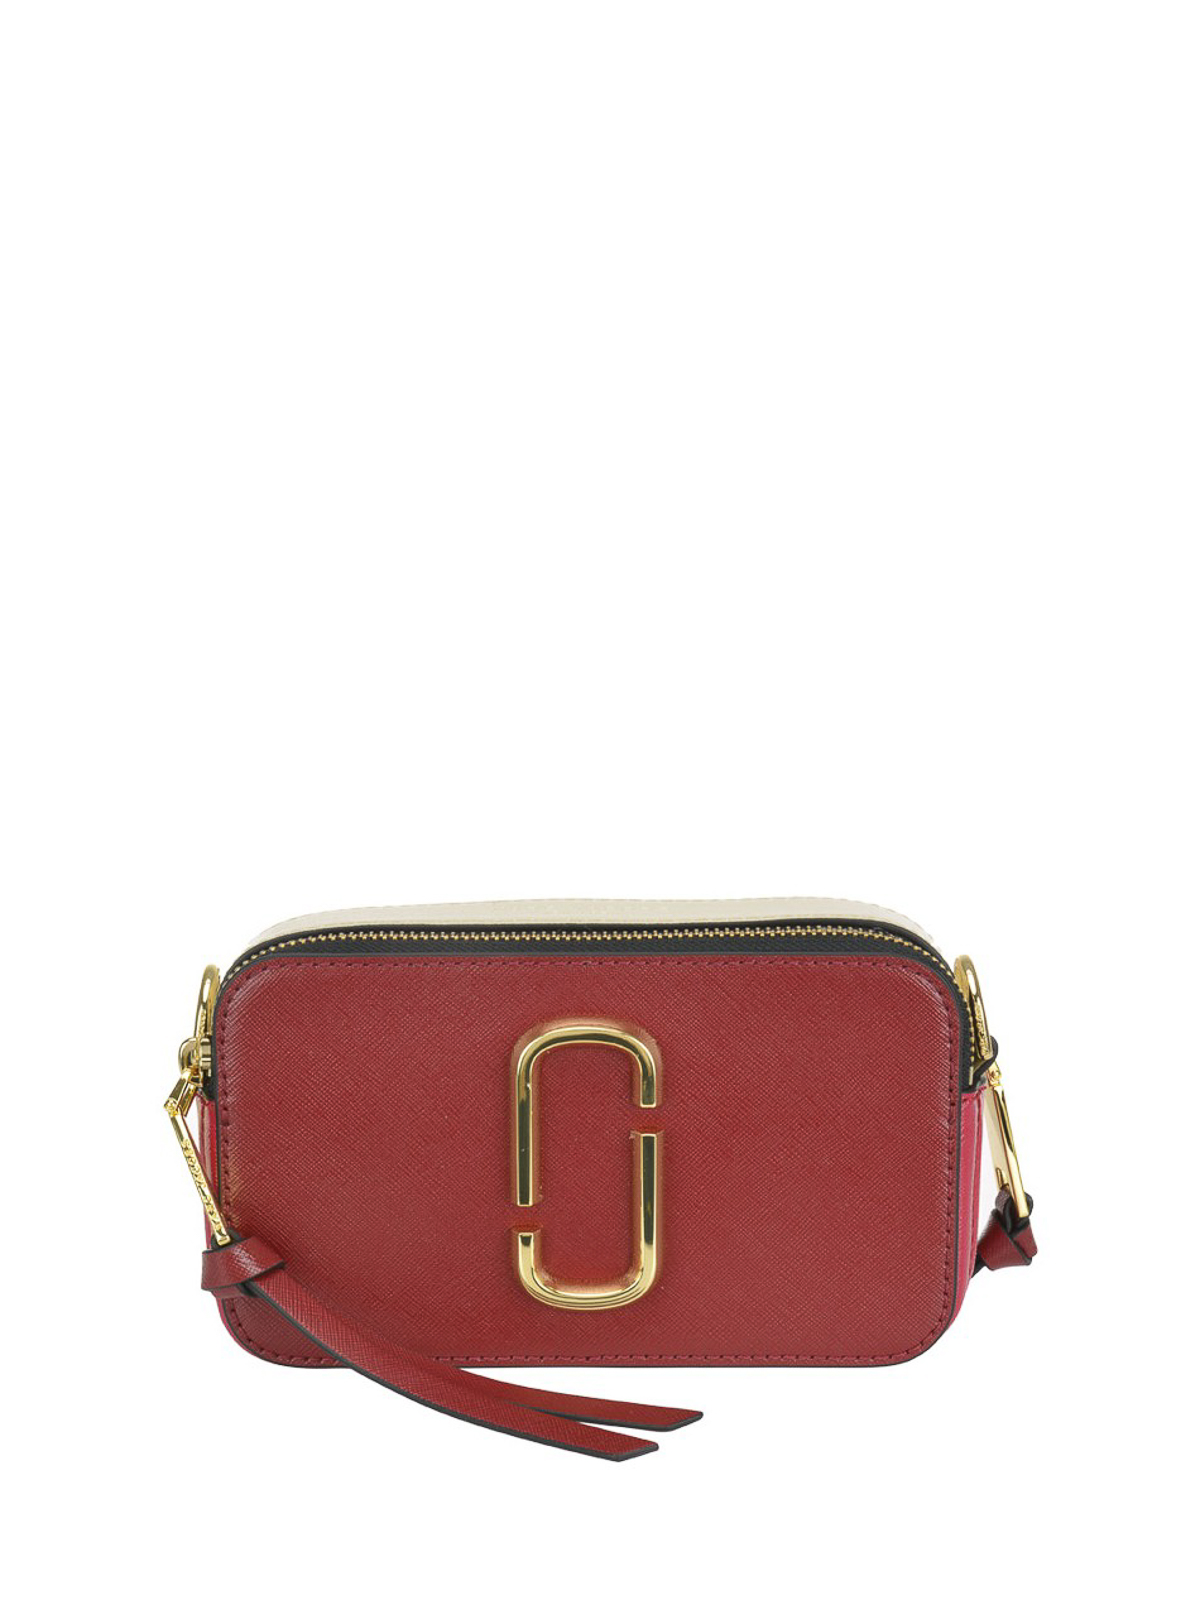 Marc Jacobs The Snapshot Small Camera Bag In Burgundy